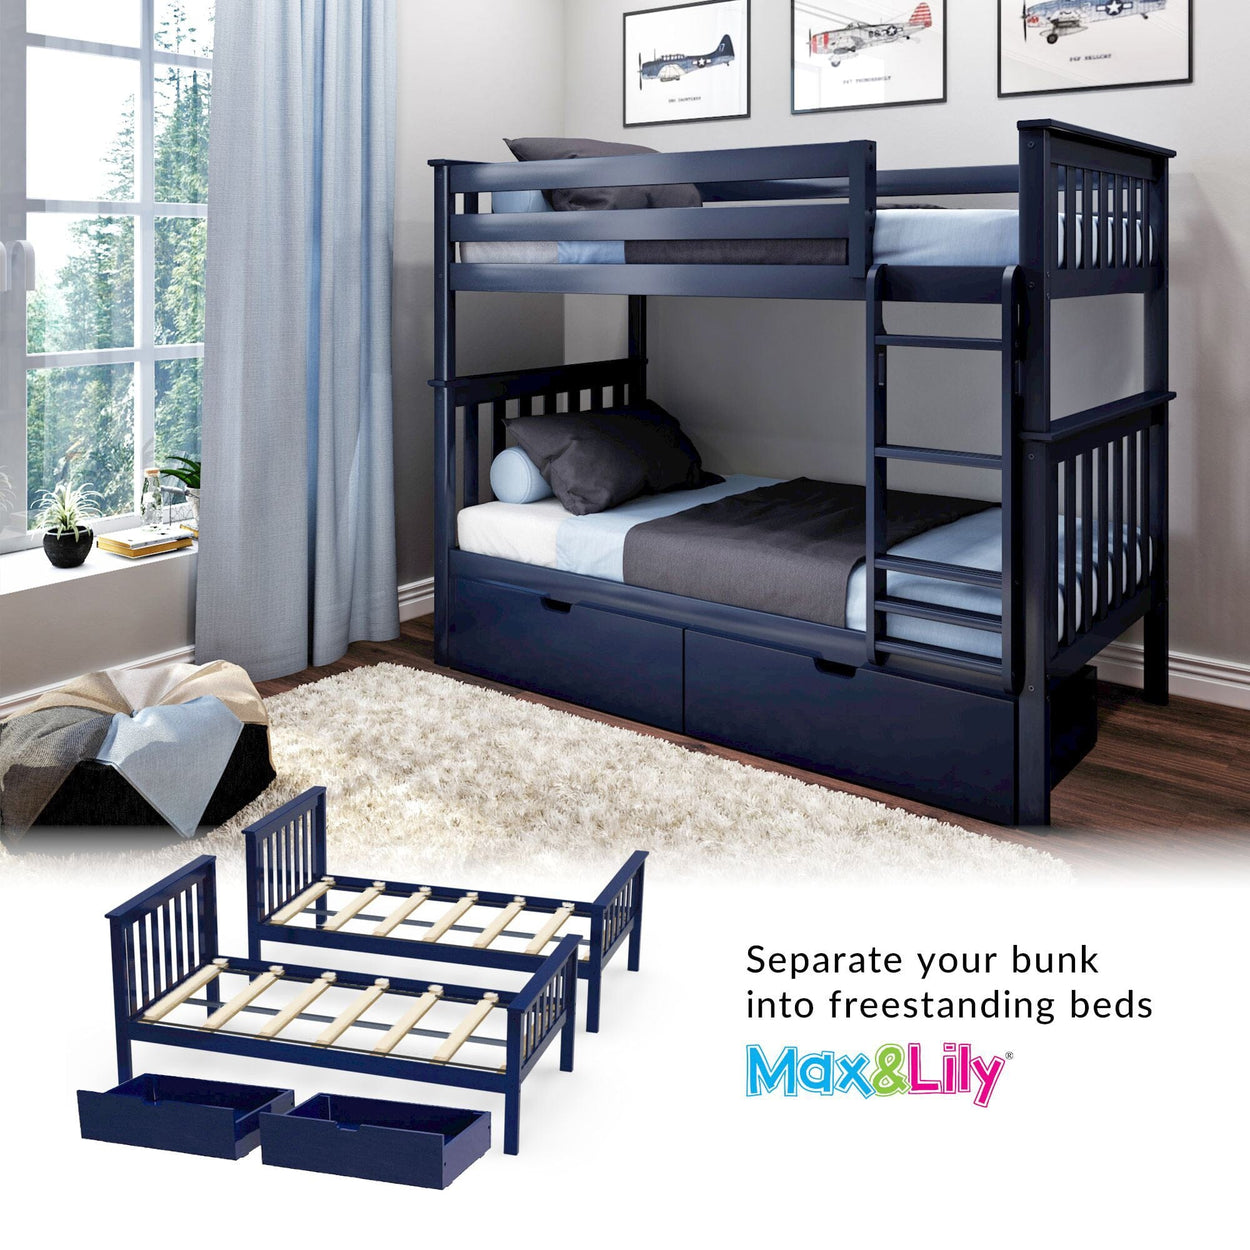 187201-131 : Bunk Beds Twin Bunk Bed With Underbed Storage Drawers, Blue